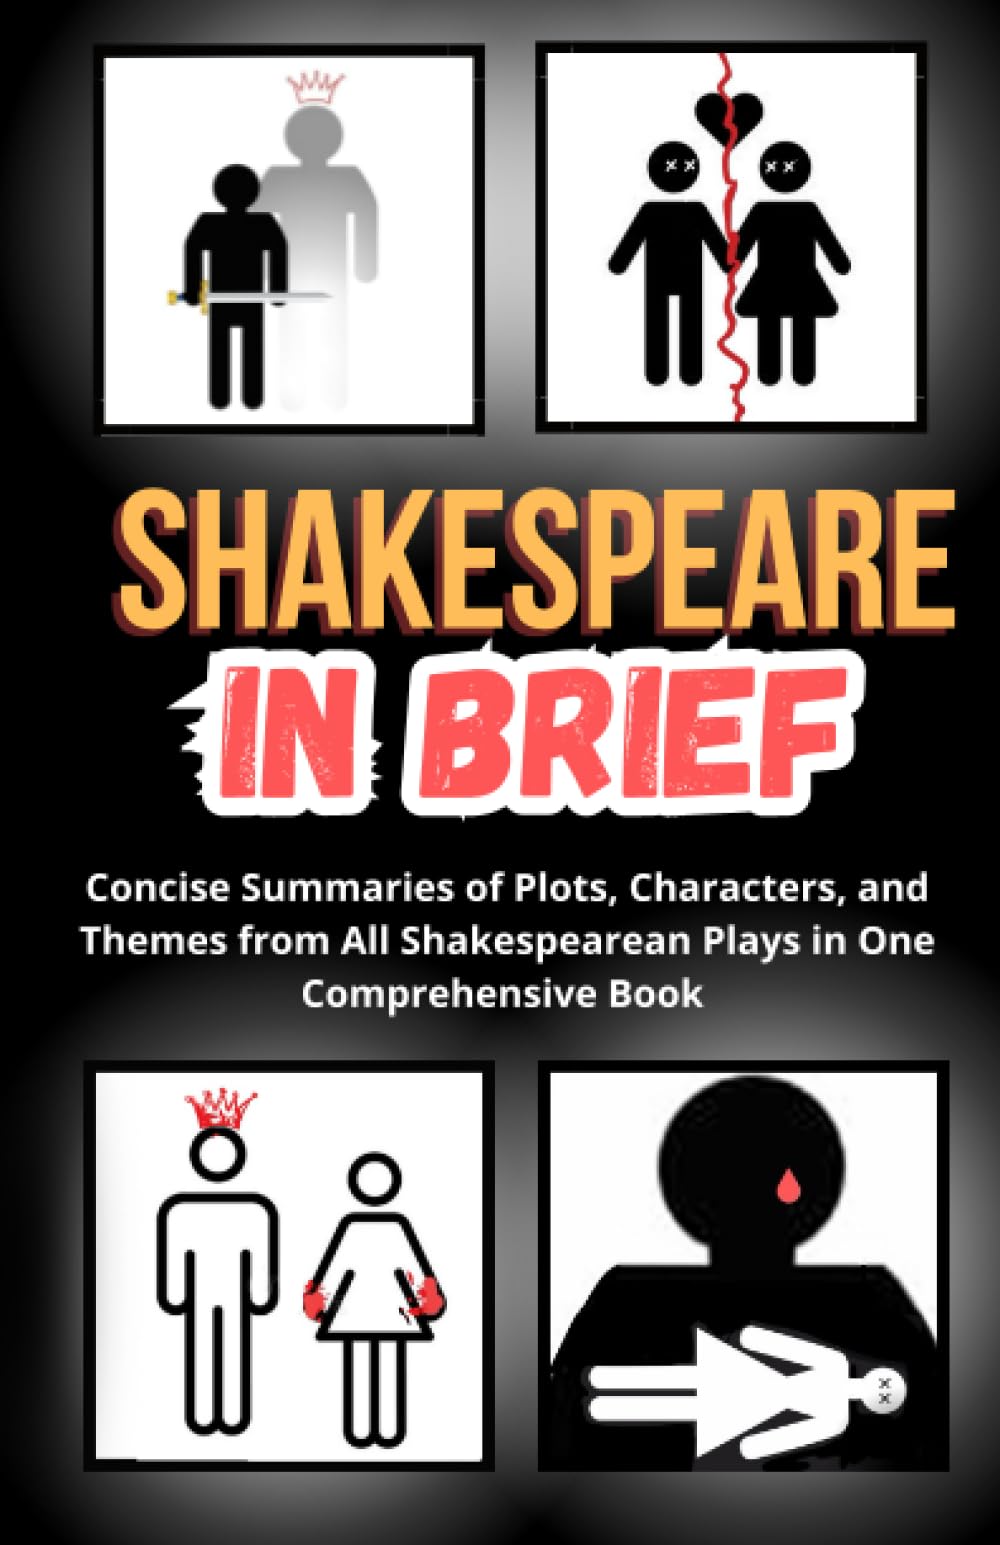 Shakespeare in Brief: Concise Summaries of Plots, Characters, and Themes from All Shakespearean Plays in One Comprehensive Book (Essential Summaries of Legendary Literary Works)